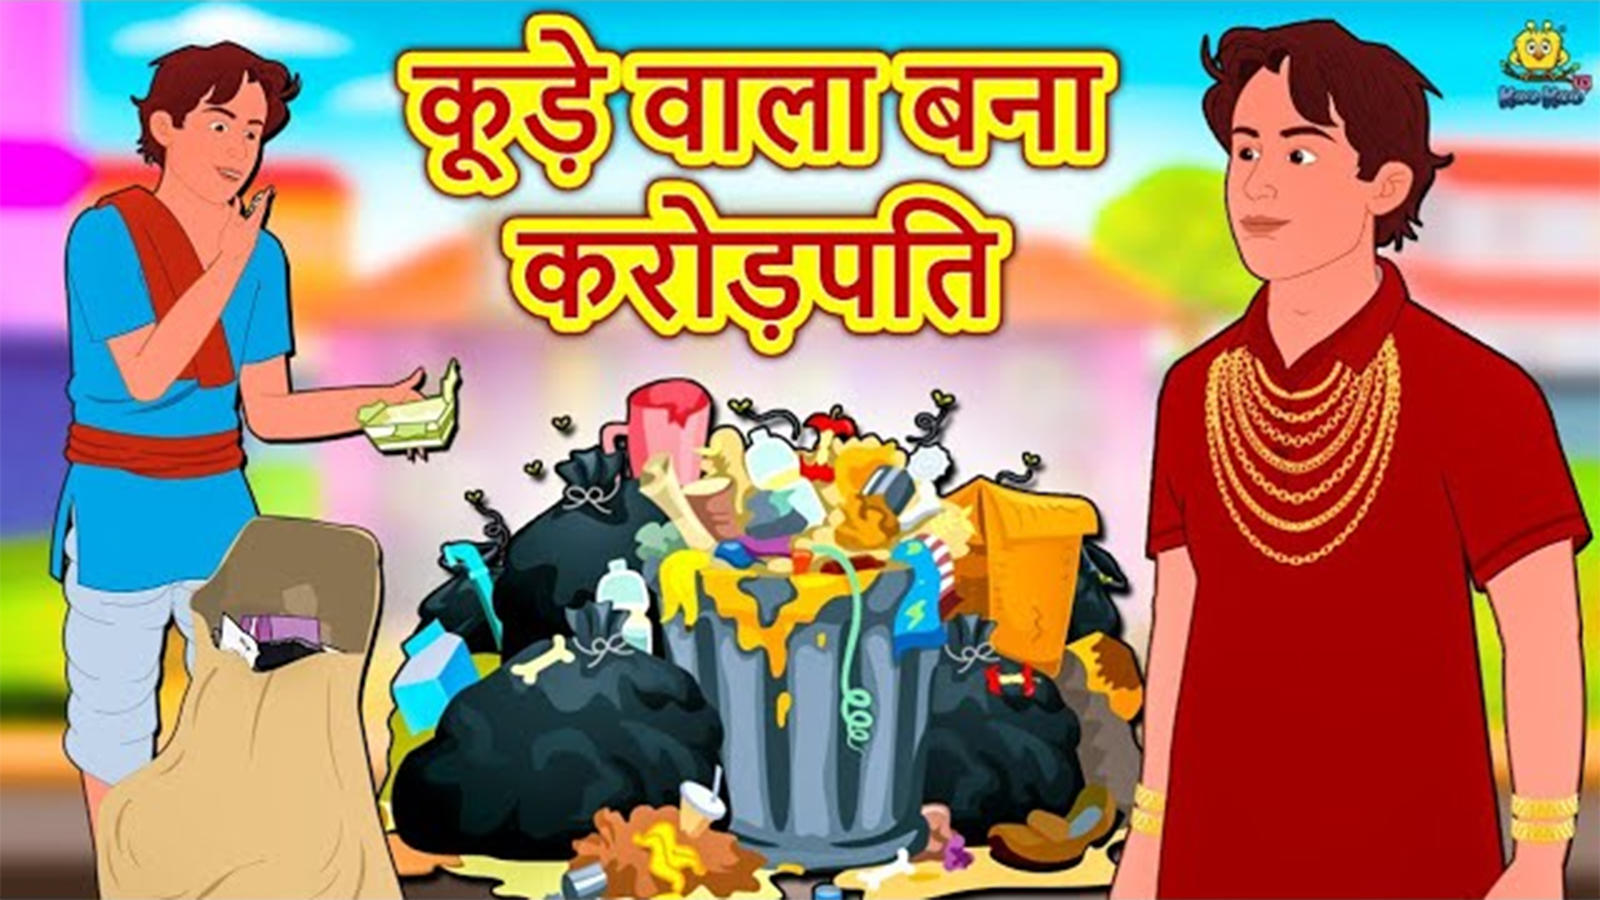 Hindi Fairy Tales: Watch Children Hindi Nursery Story 'Kude Wala Bana  Crorepati' for Kids - Check out Fun Kids Nursery Rhymes And Baby Songs In  Hindi | Entertainment - Times of India Videos